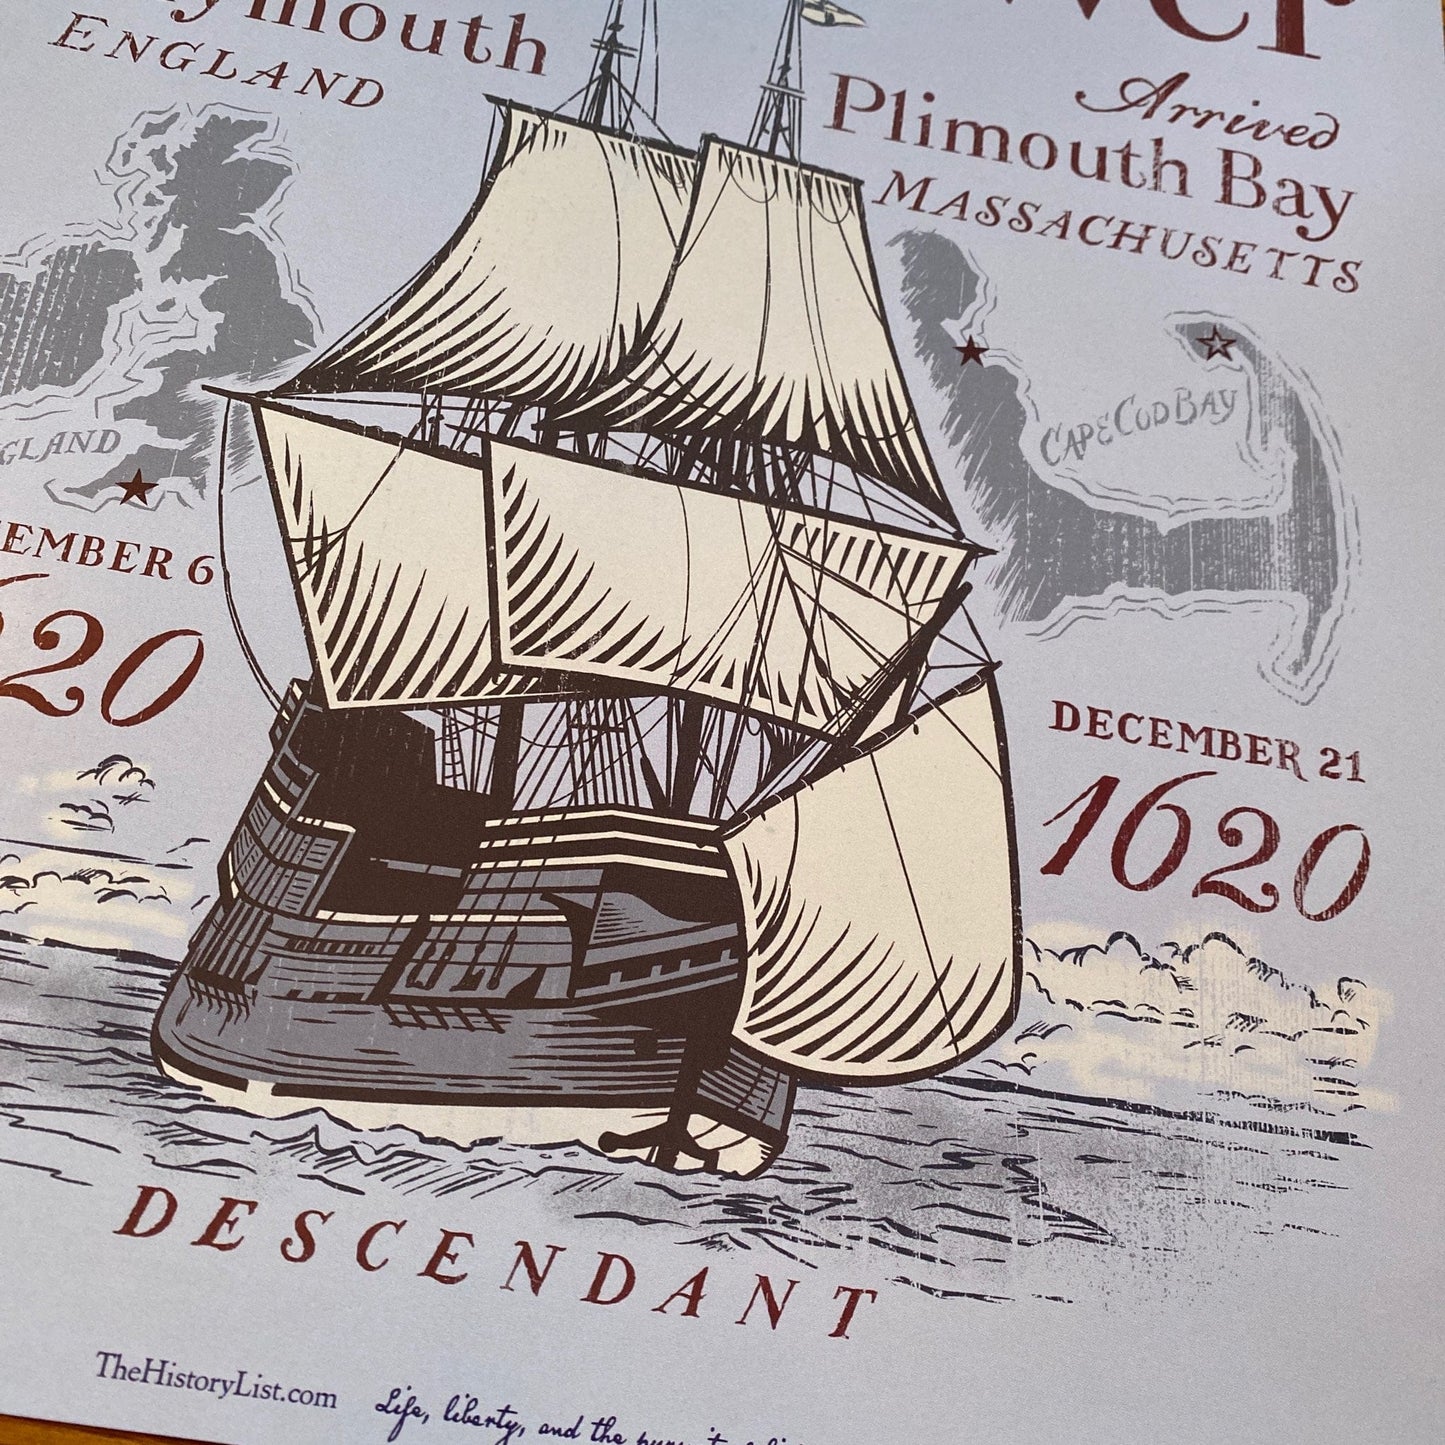 "The Voyage of the Mayflower" as a small poster